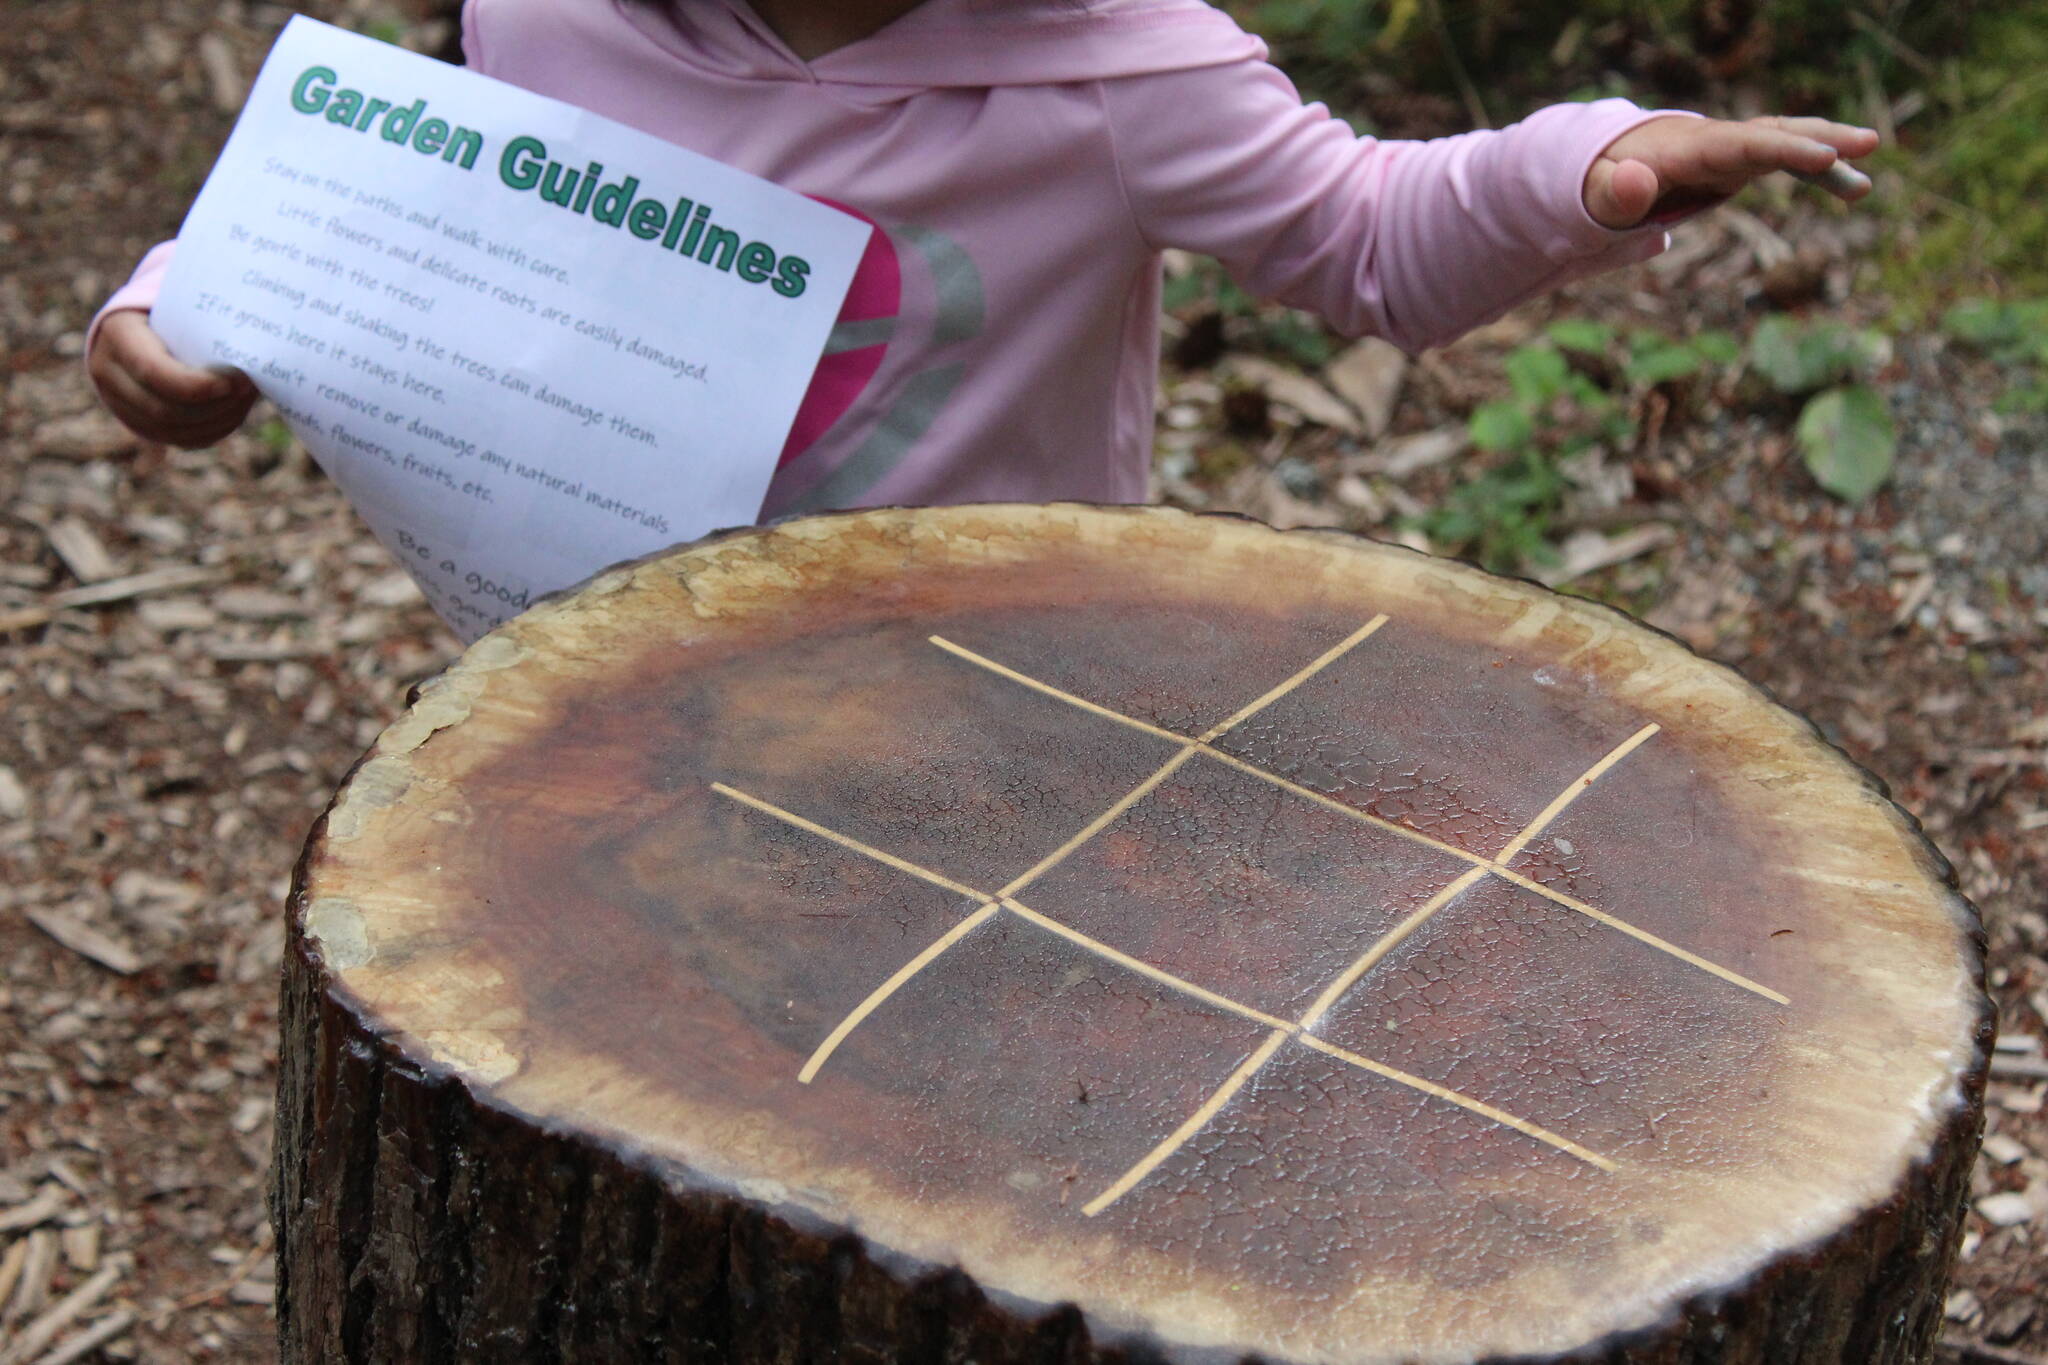 A little girl touches the tic-tac-toe game in the Lake Wilderness Arboretum during the Tree Tour. Photo by Bailey Jo Josie/Sound Publishing.